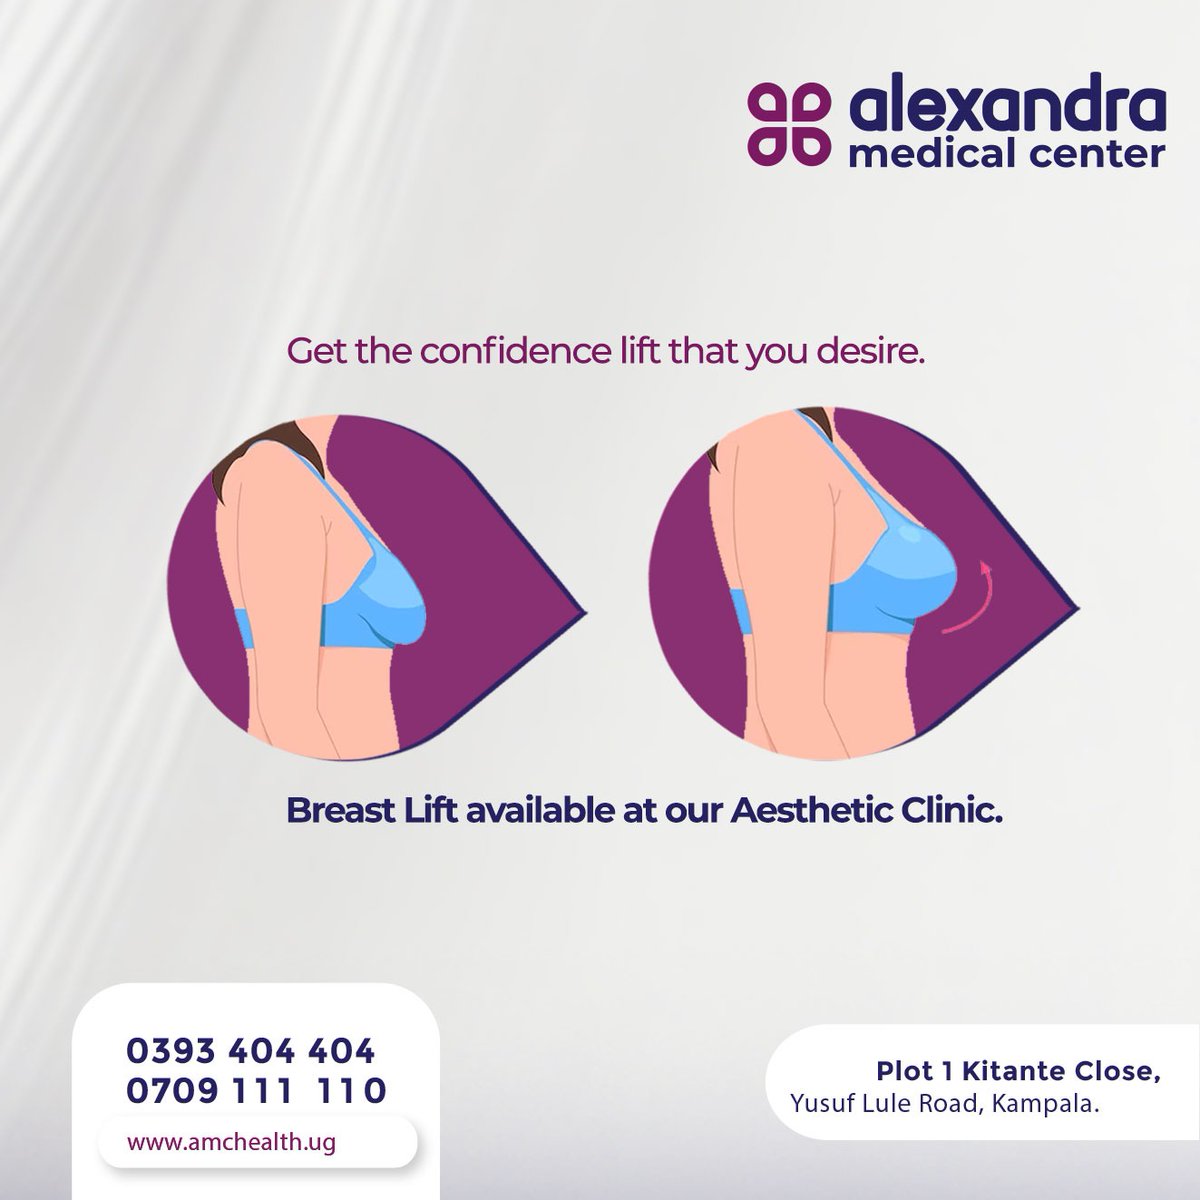 Your desirable look is now achievable!

Check in for Breast Lifting to prevent sagging breasts and achieve your desired breast shape at our Aesthetic Clinic.

#AlexandraMedicalCenter #BreastLift #Confidence